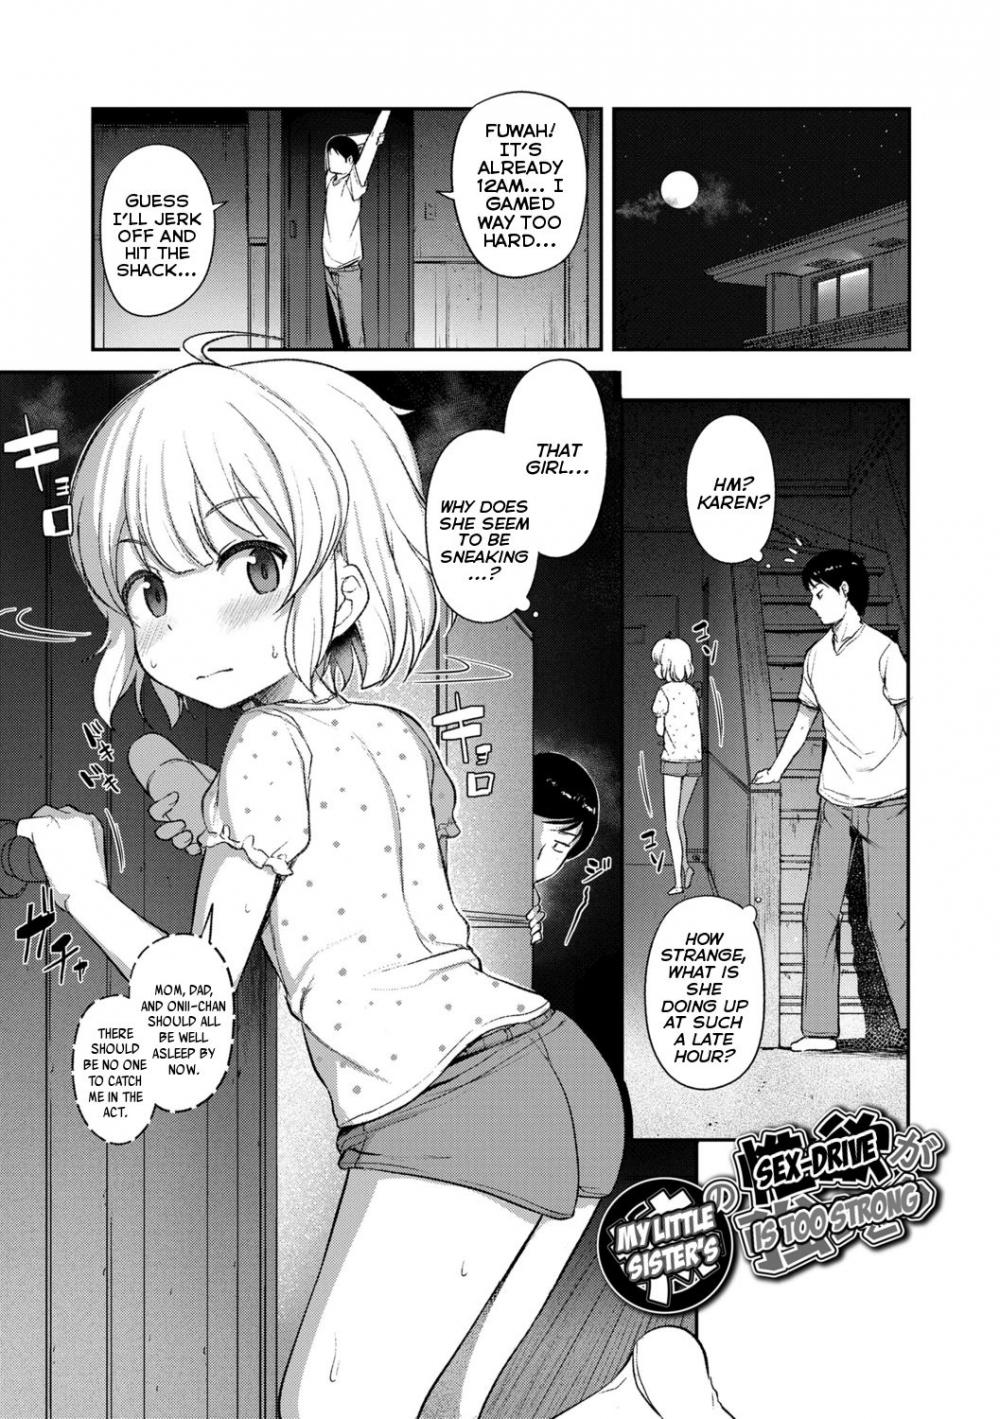 Hentai Manga Comic-What Kind of Weirdo Onii-chan Gets Excited From Seeing His Little Sister Naked?-Chapter 5-1